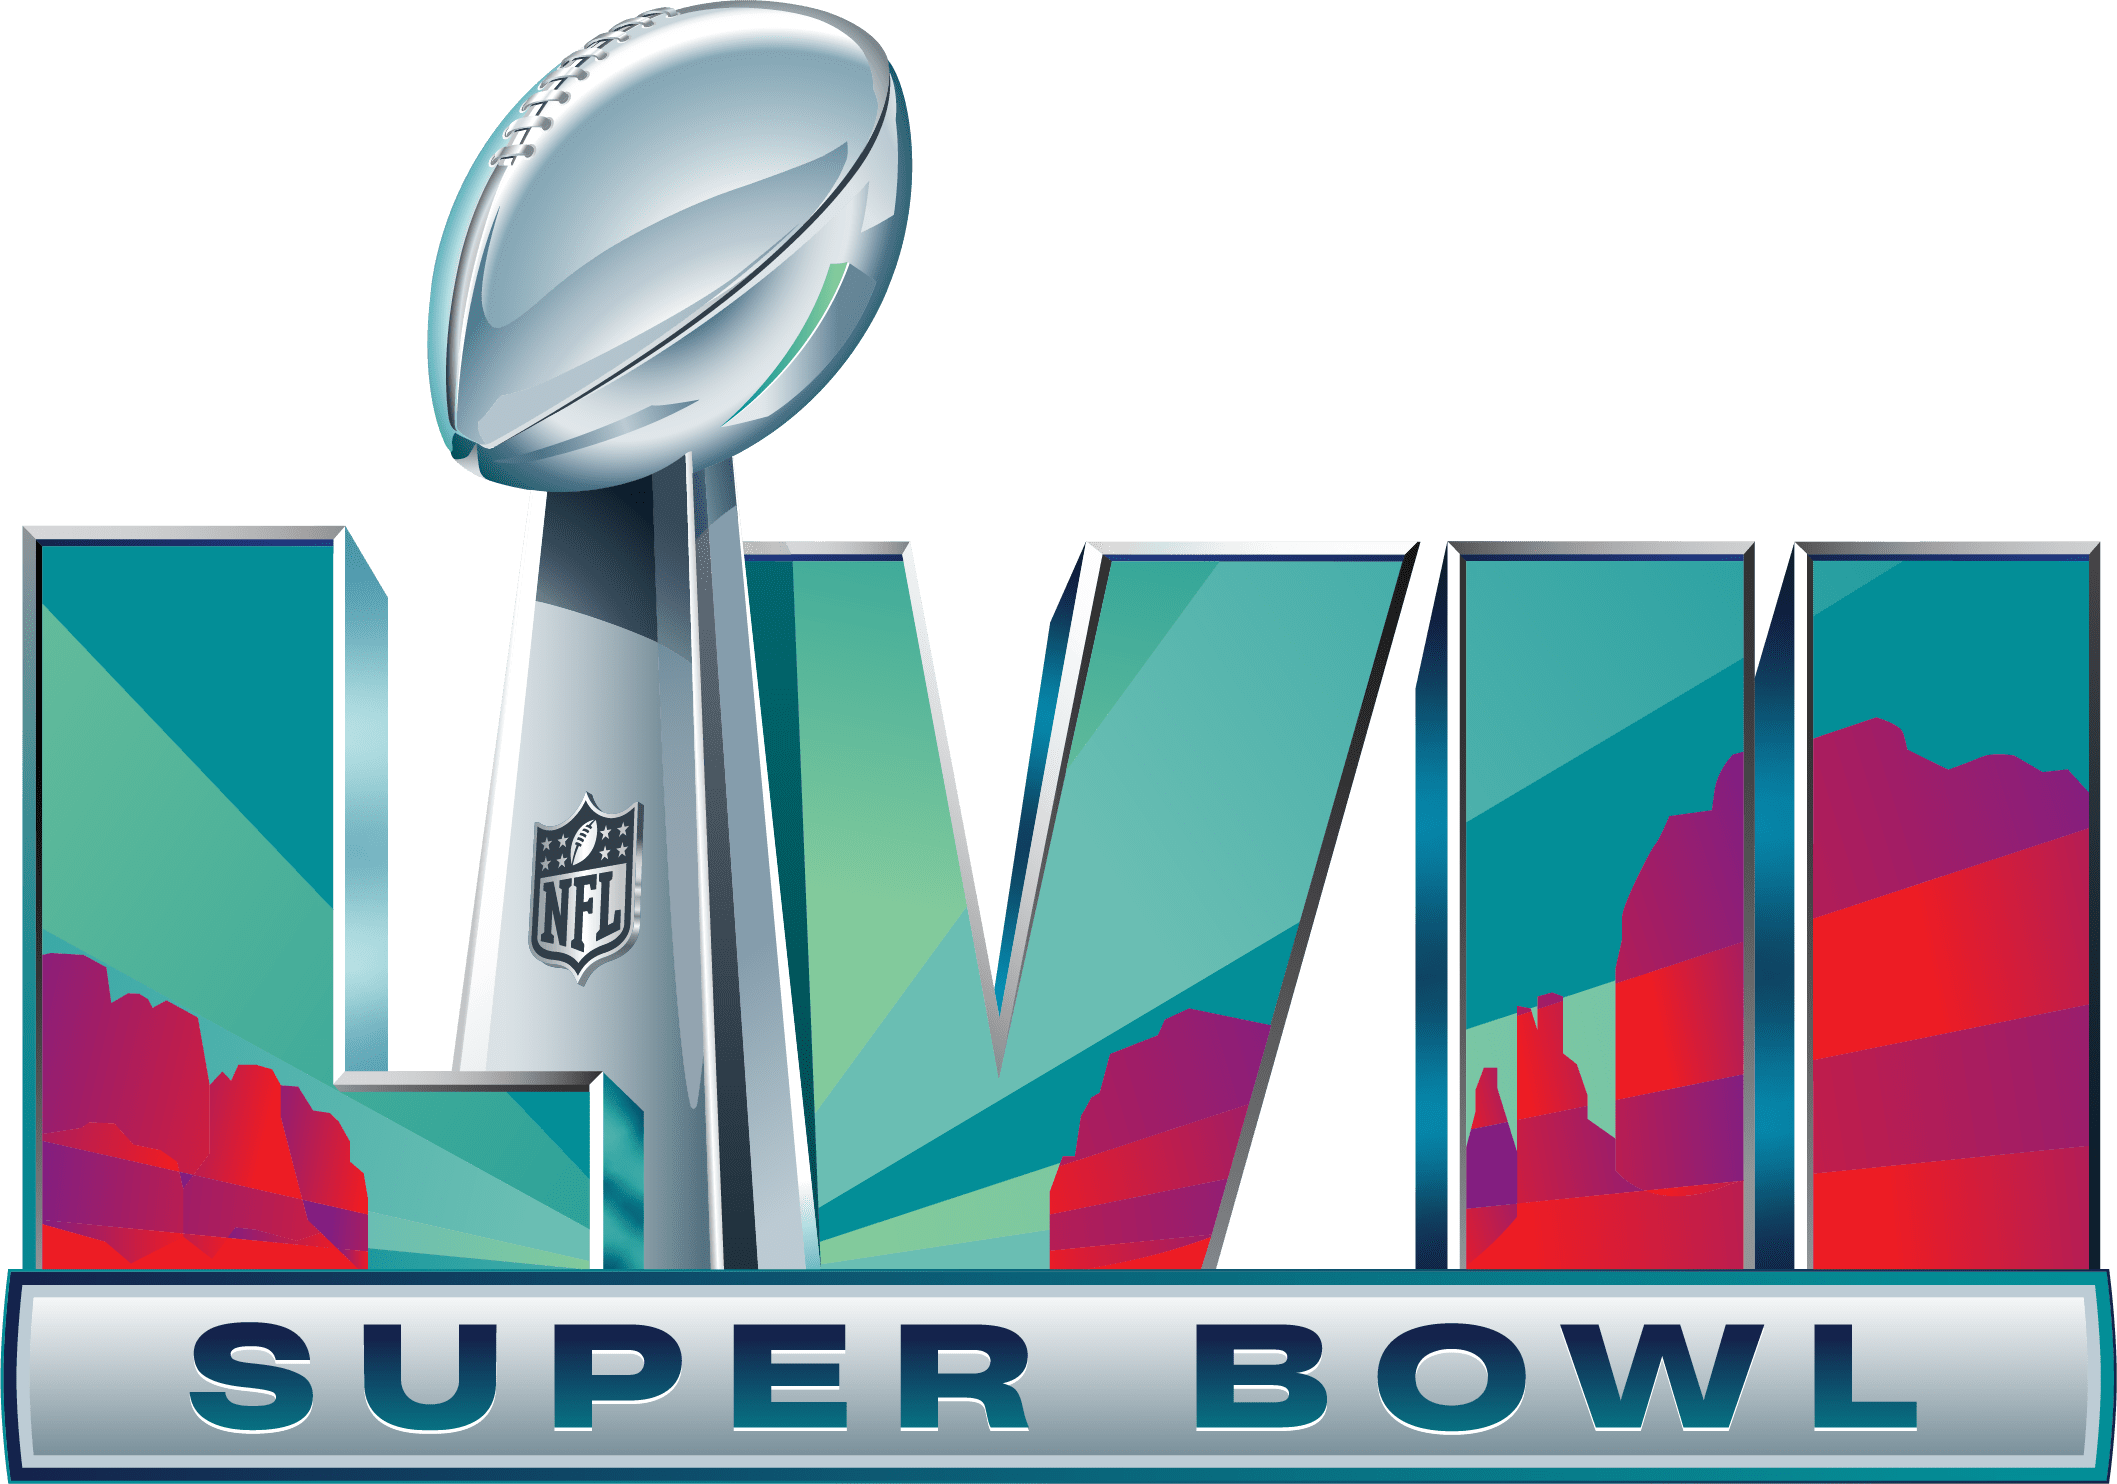 Be Aware Of Super Bowl Scams